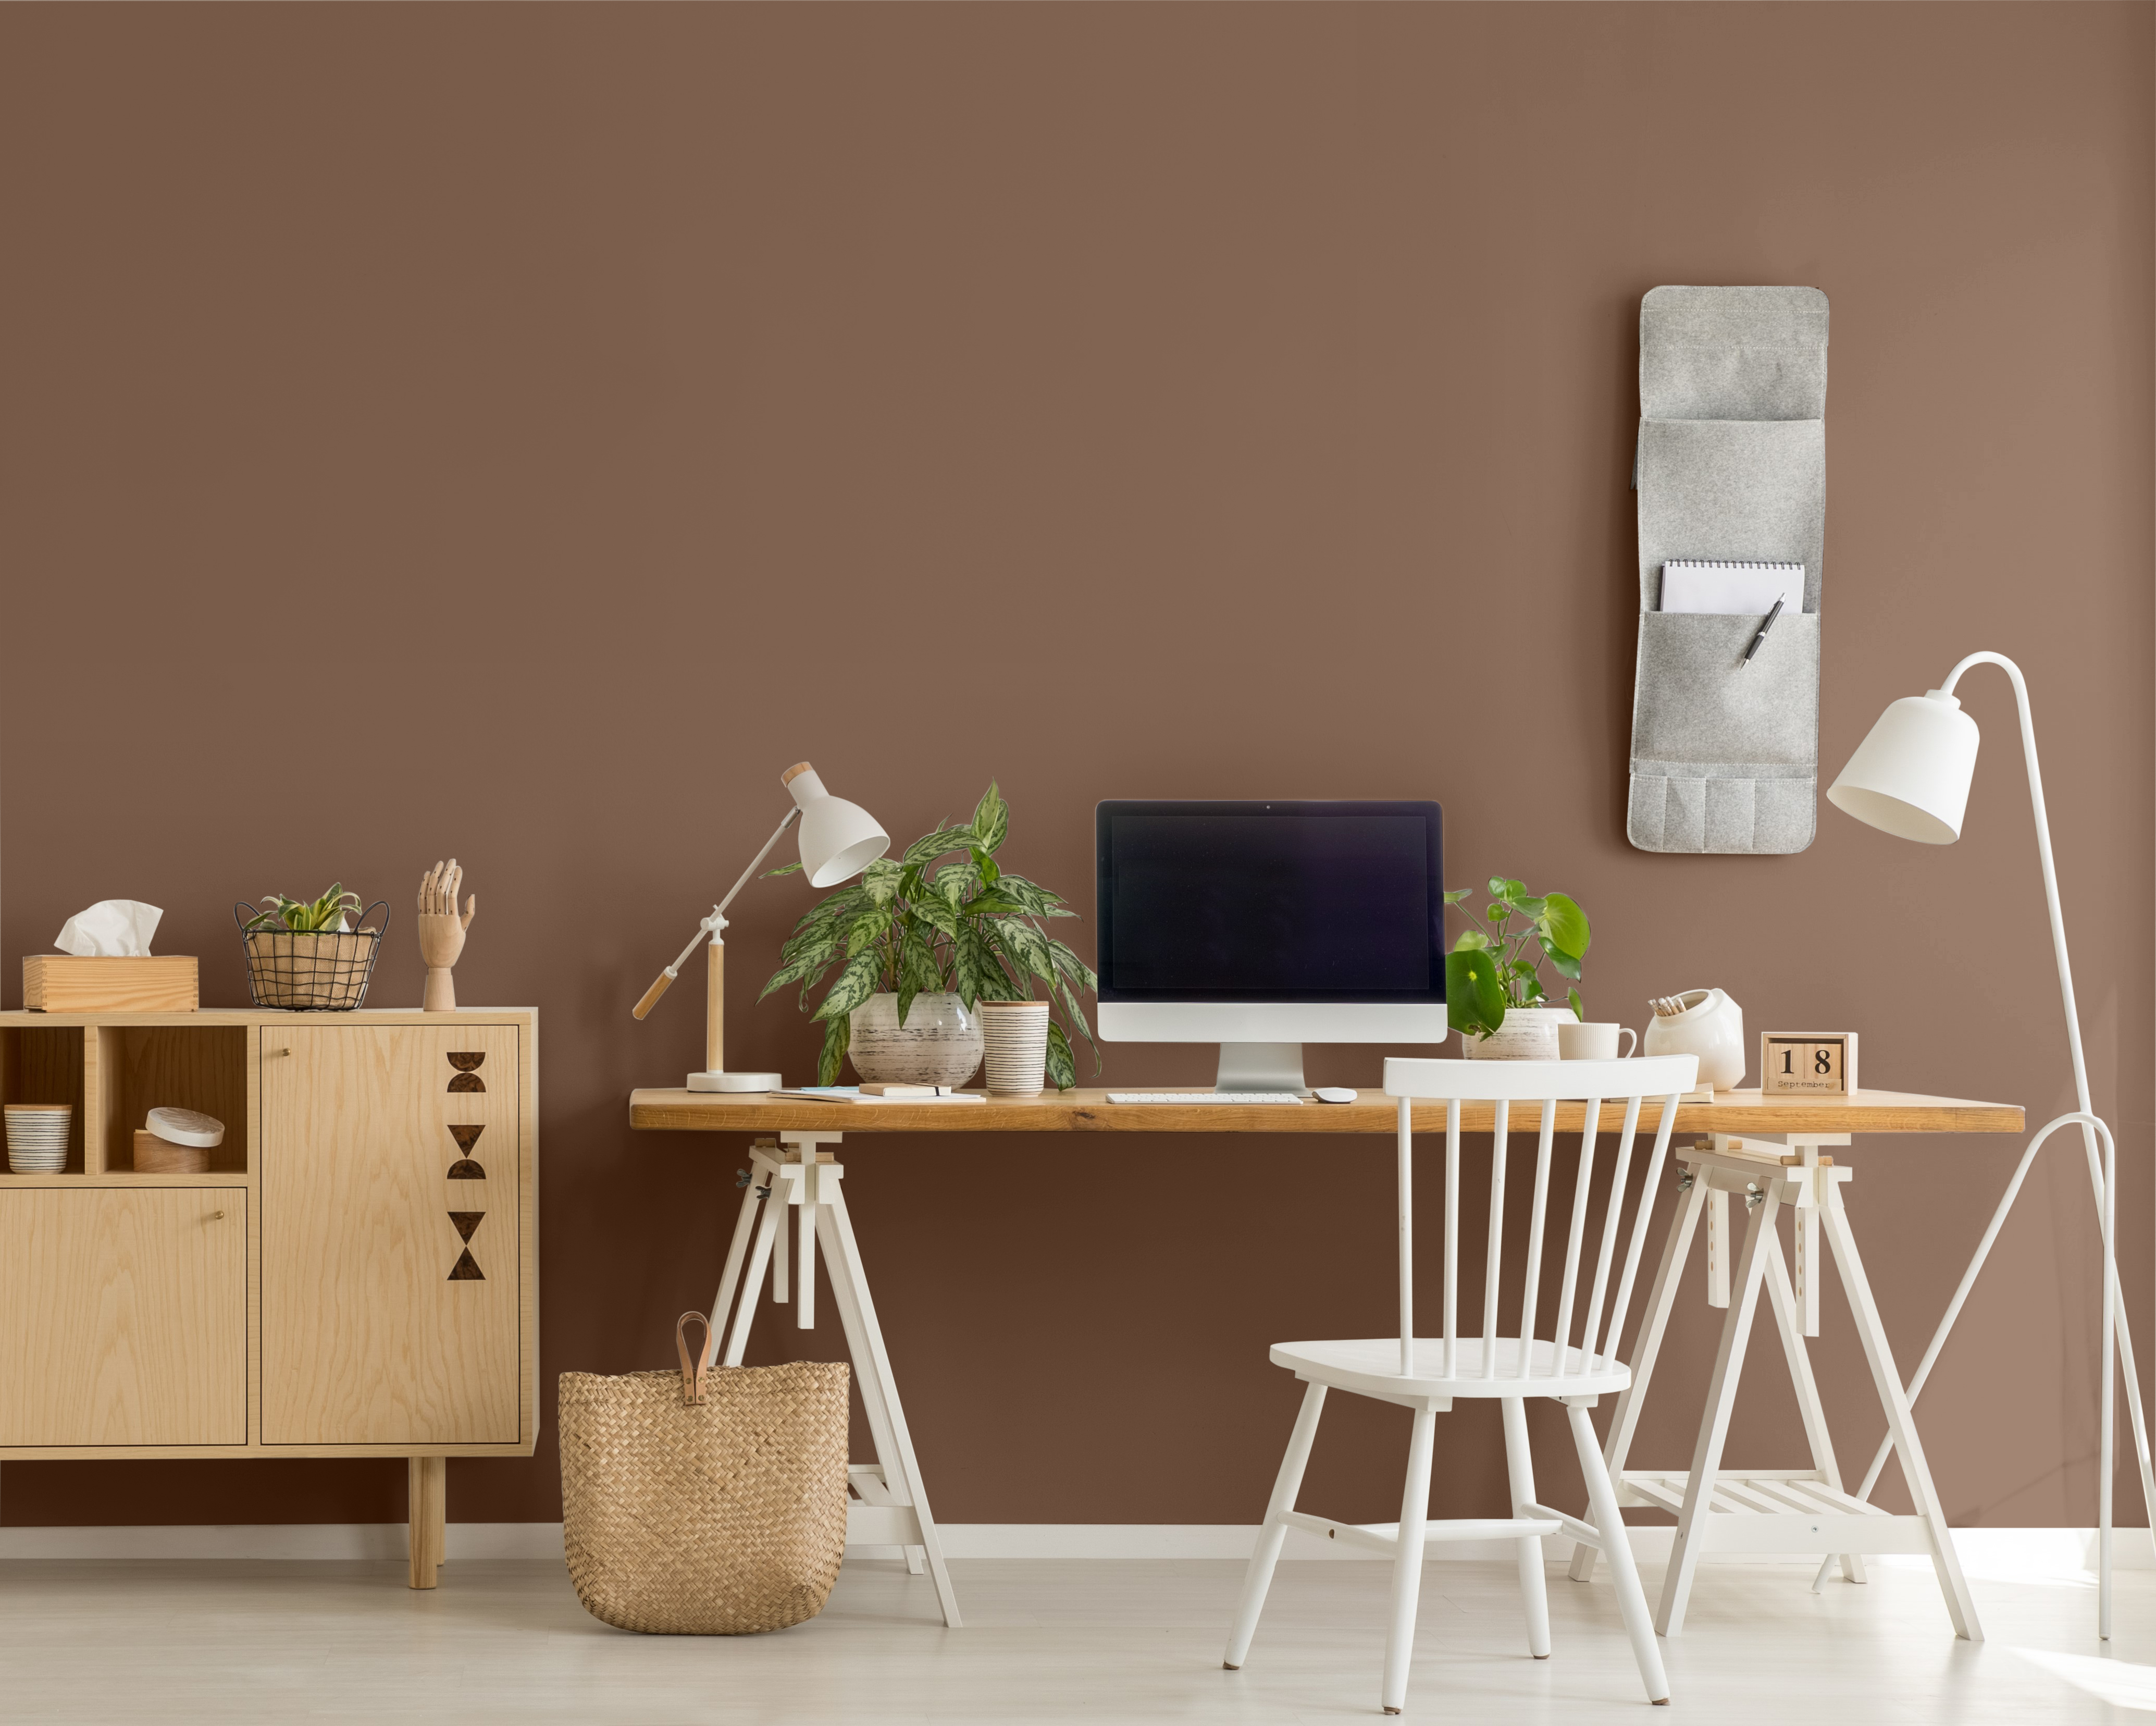 A photo of a wooden cupboard next to a desk with desktop computer and plants in home office interior. The wall color is painted in brown color called Wild Mustang. 